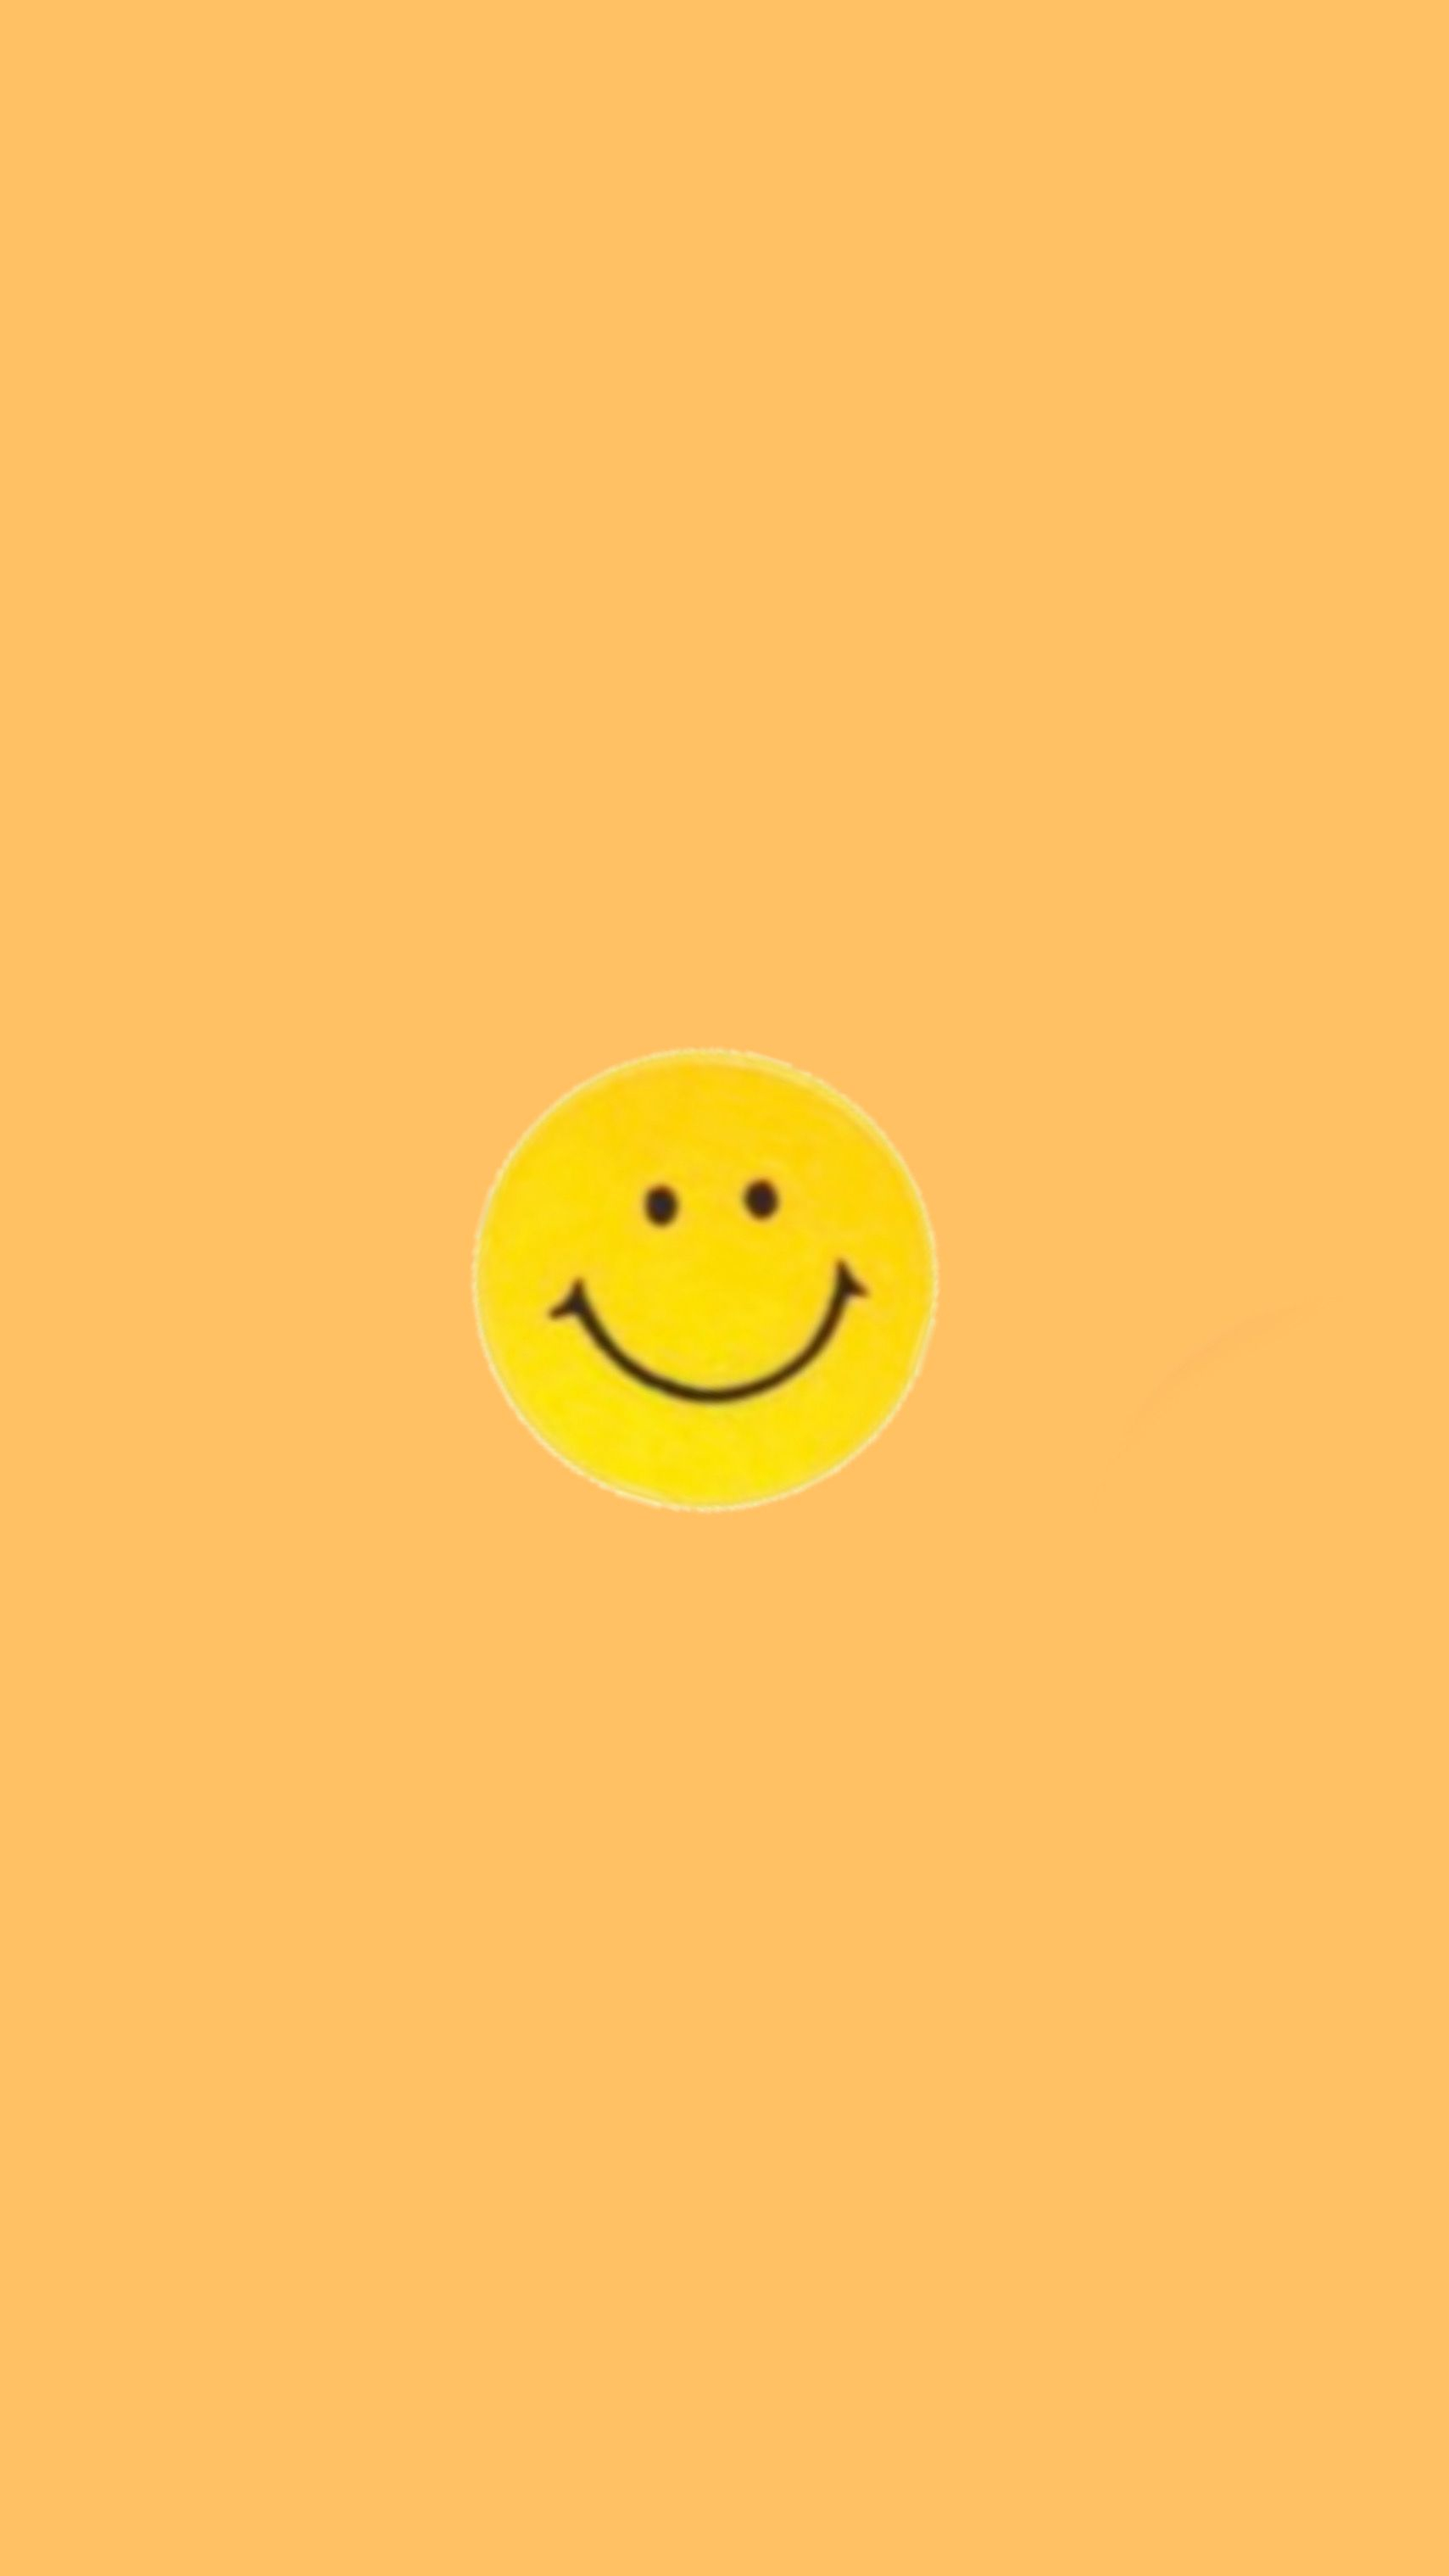 A yellow background with an image of the smiley face - Smile